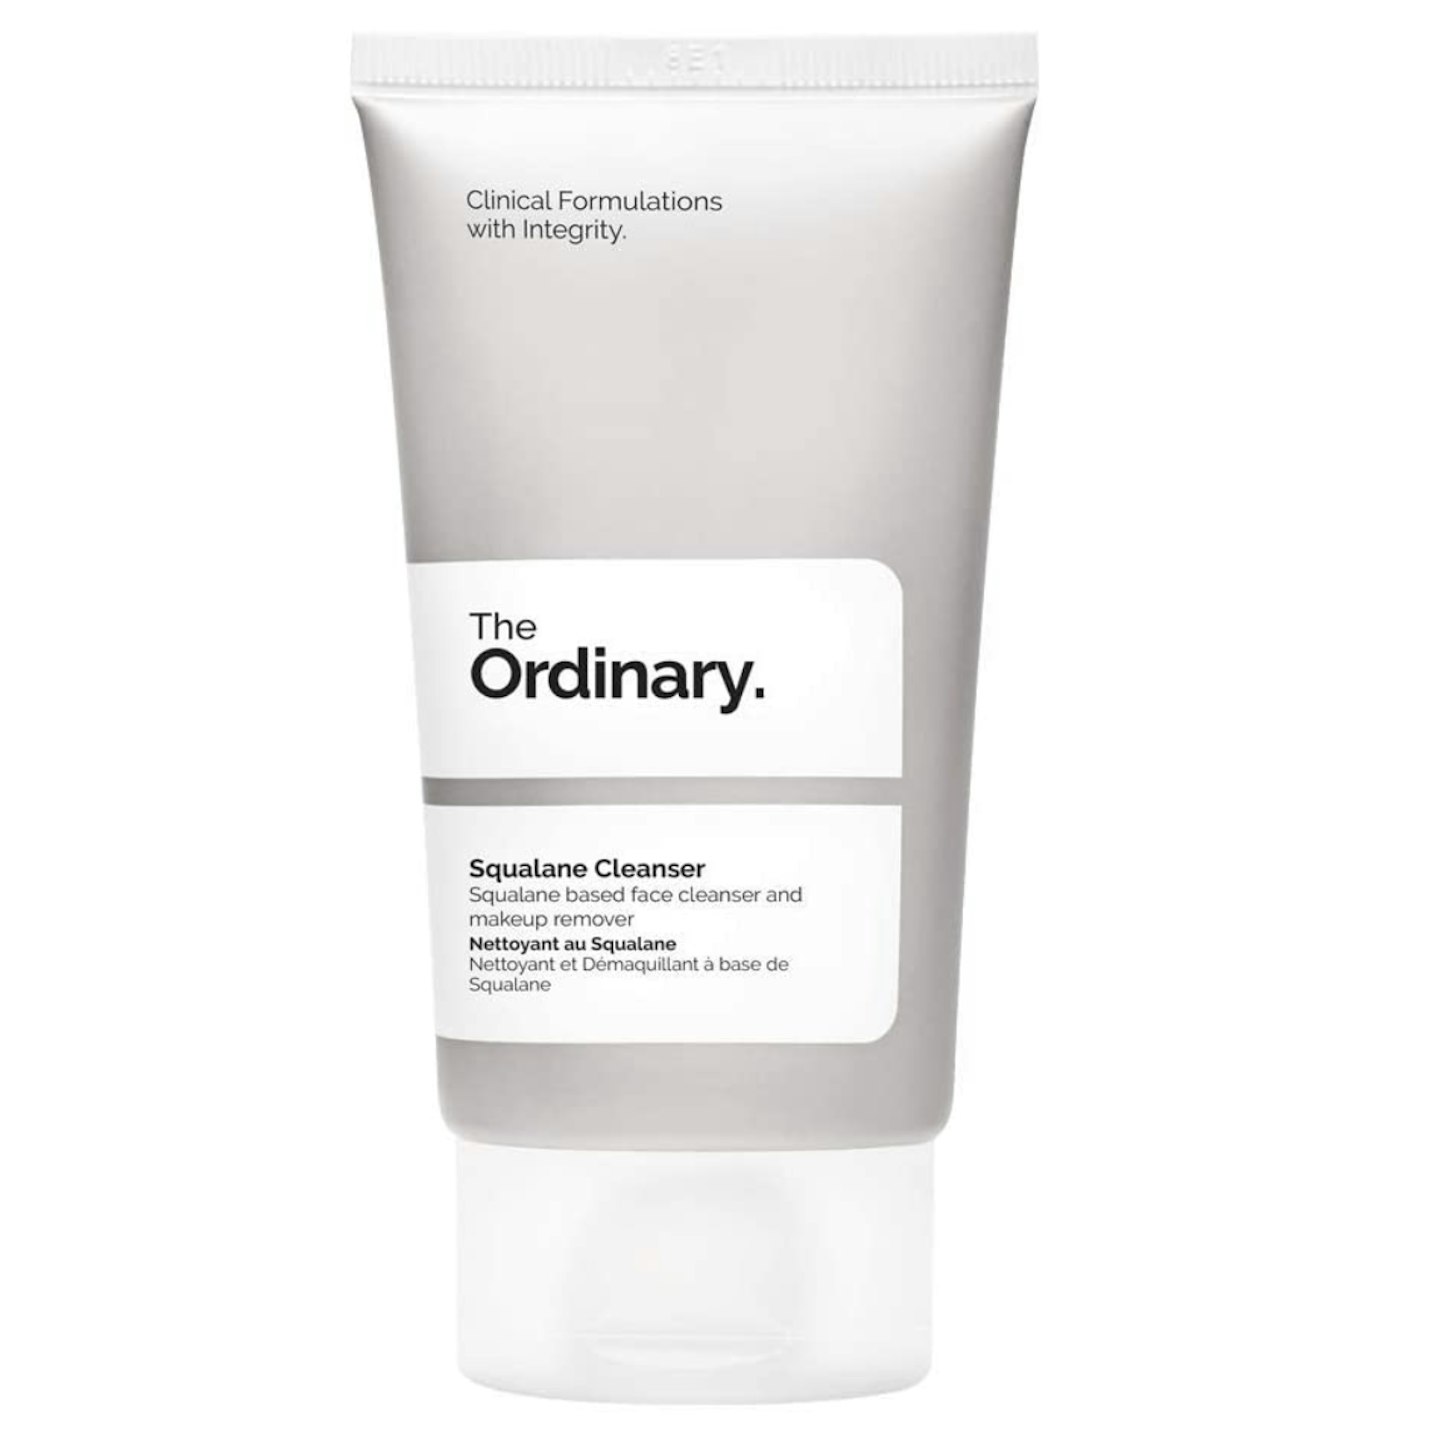 The Ordinary' Squalane Cleanser